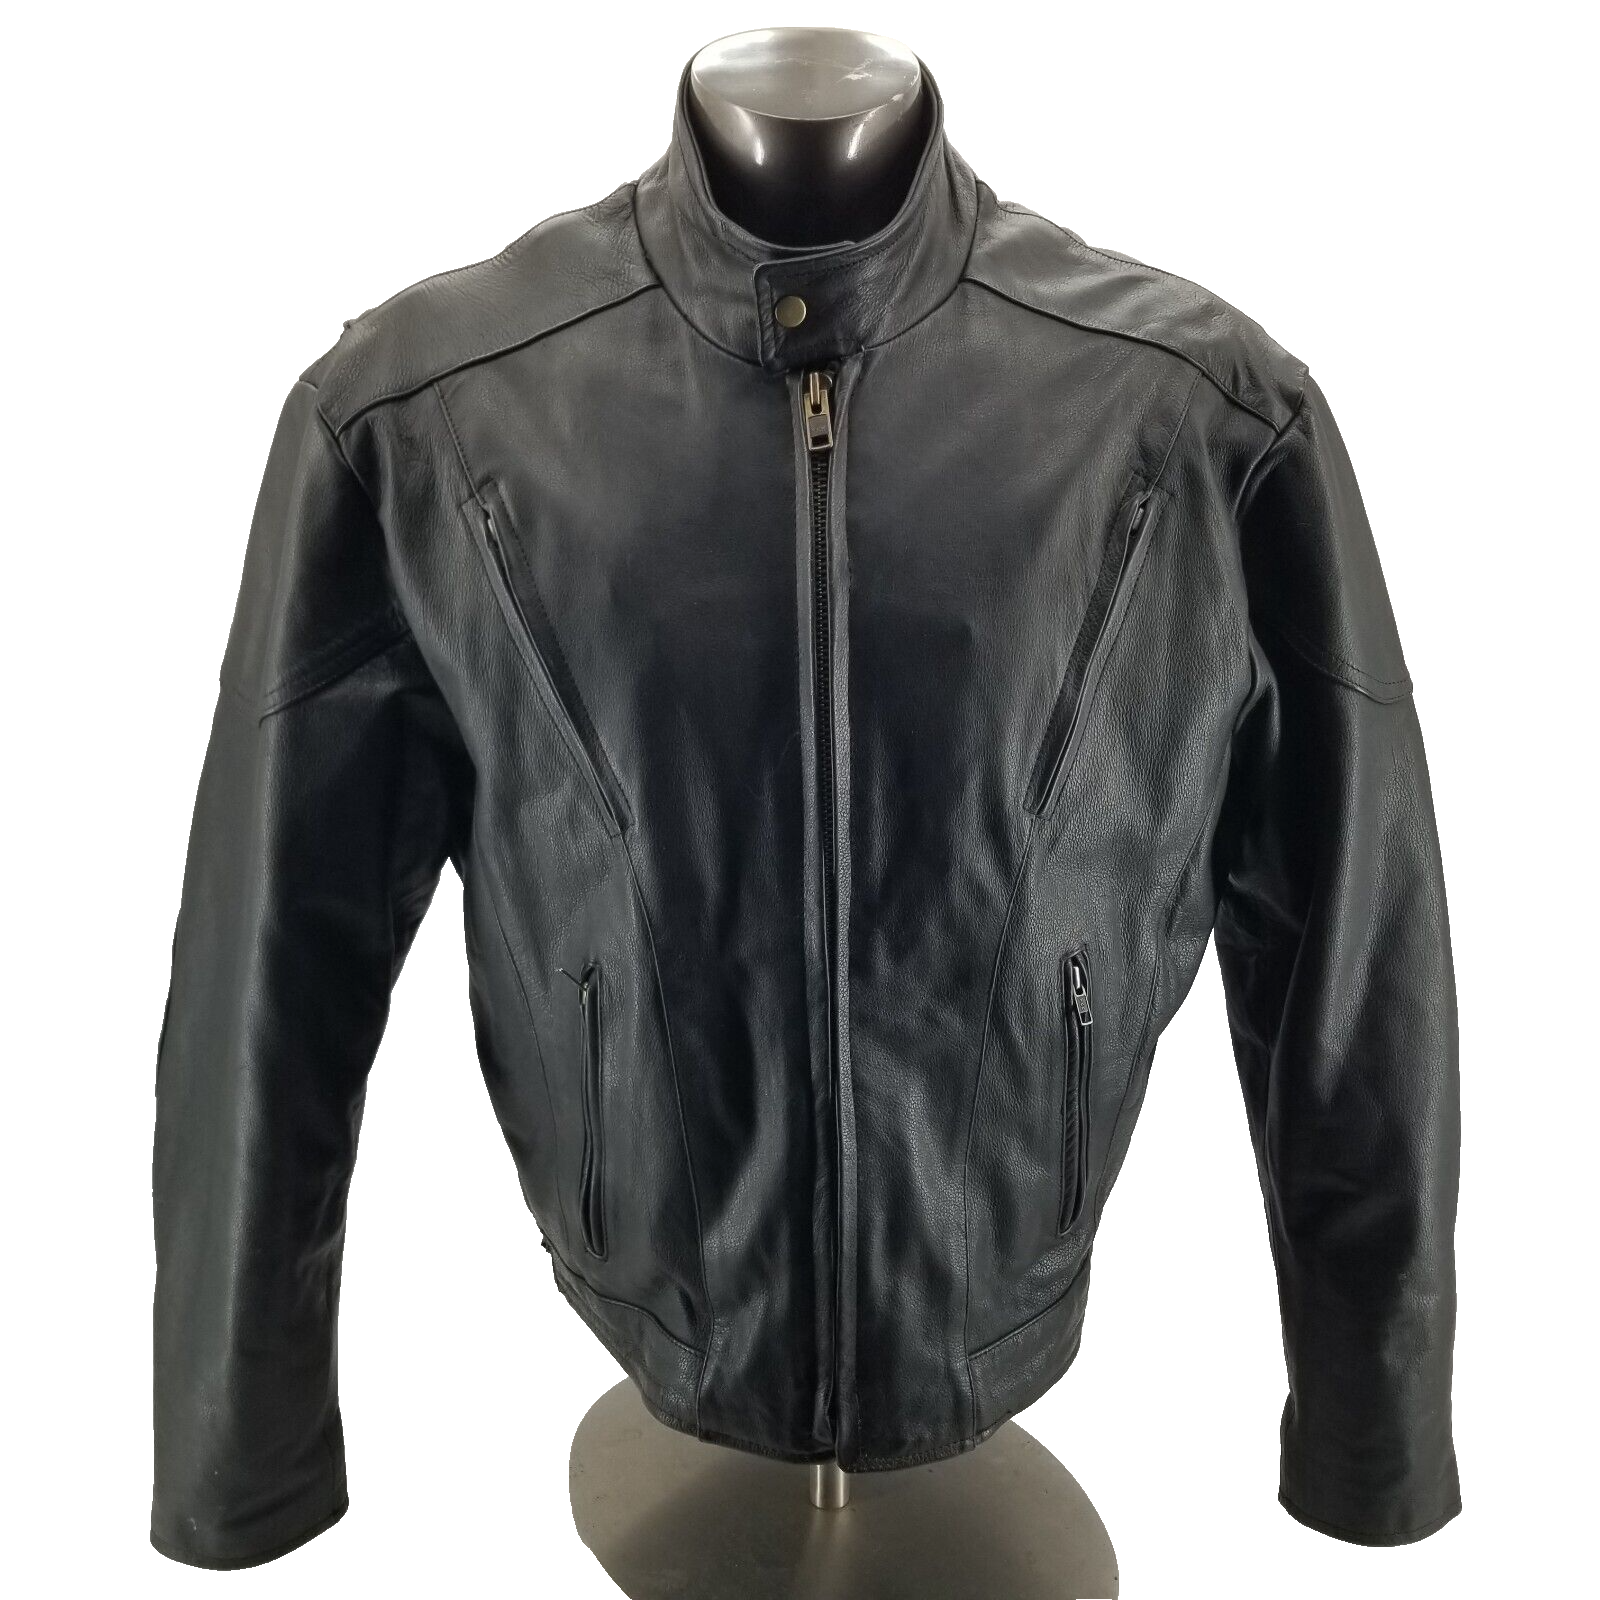 Primary image for Unik Premium Leather Bomber Motorcycle Jacket  Black w/ Zip Out Liner  Men's 48